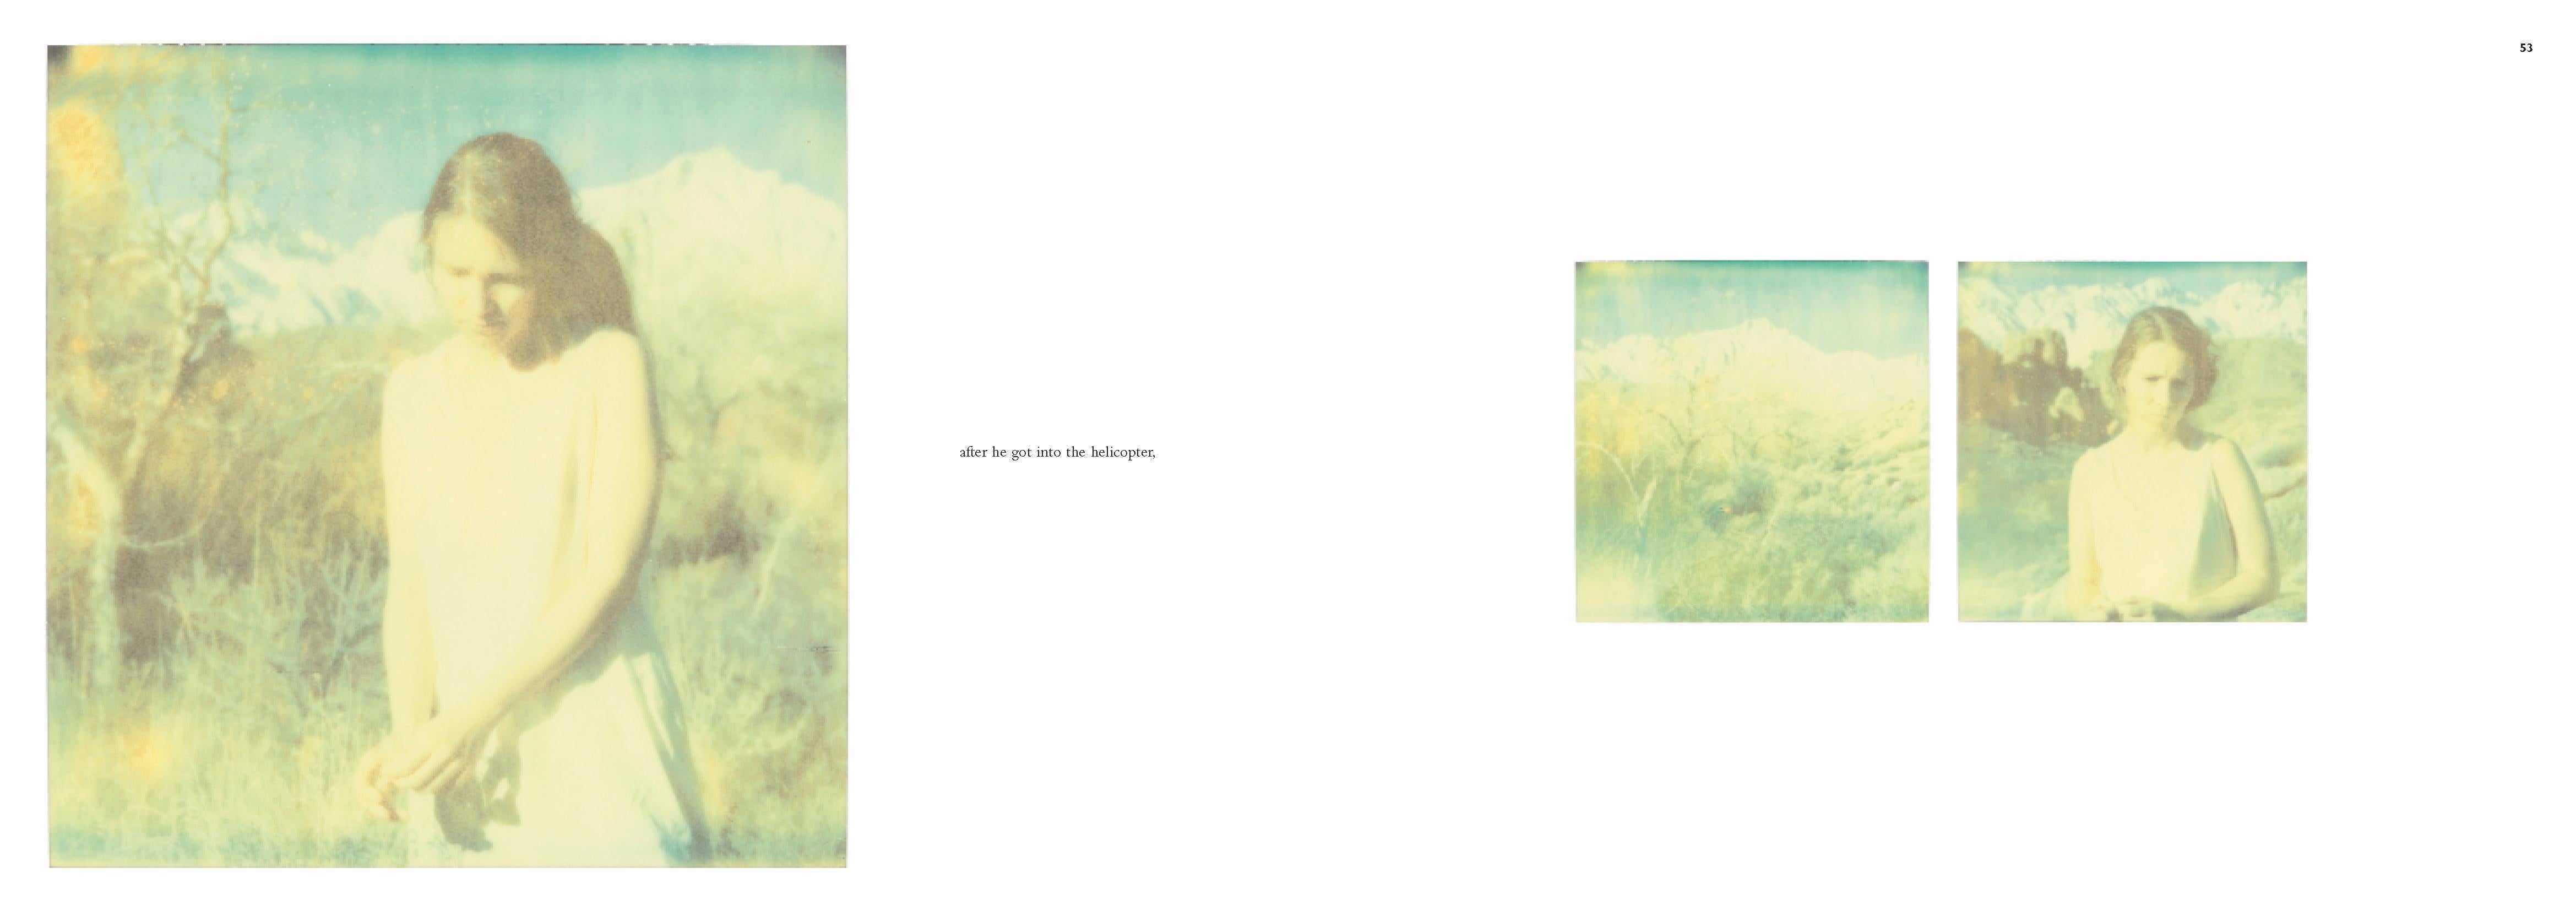 Wind Swep (Wastelands) - diptych, Contemporary, Figurative, Polaroid, analog For Sale 4